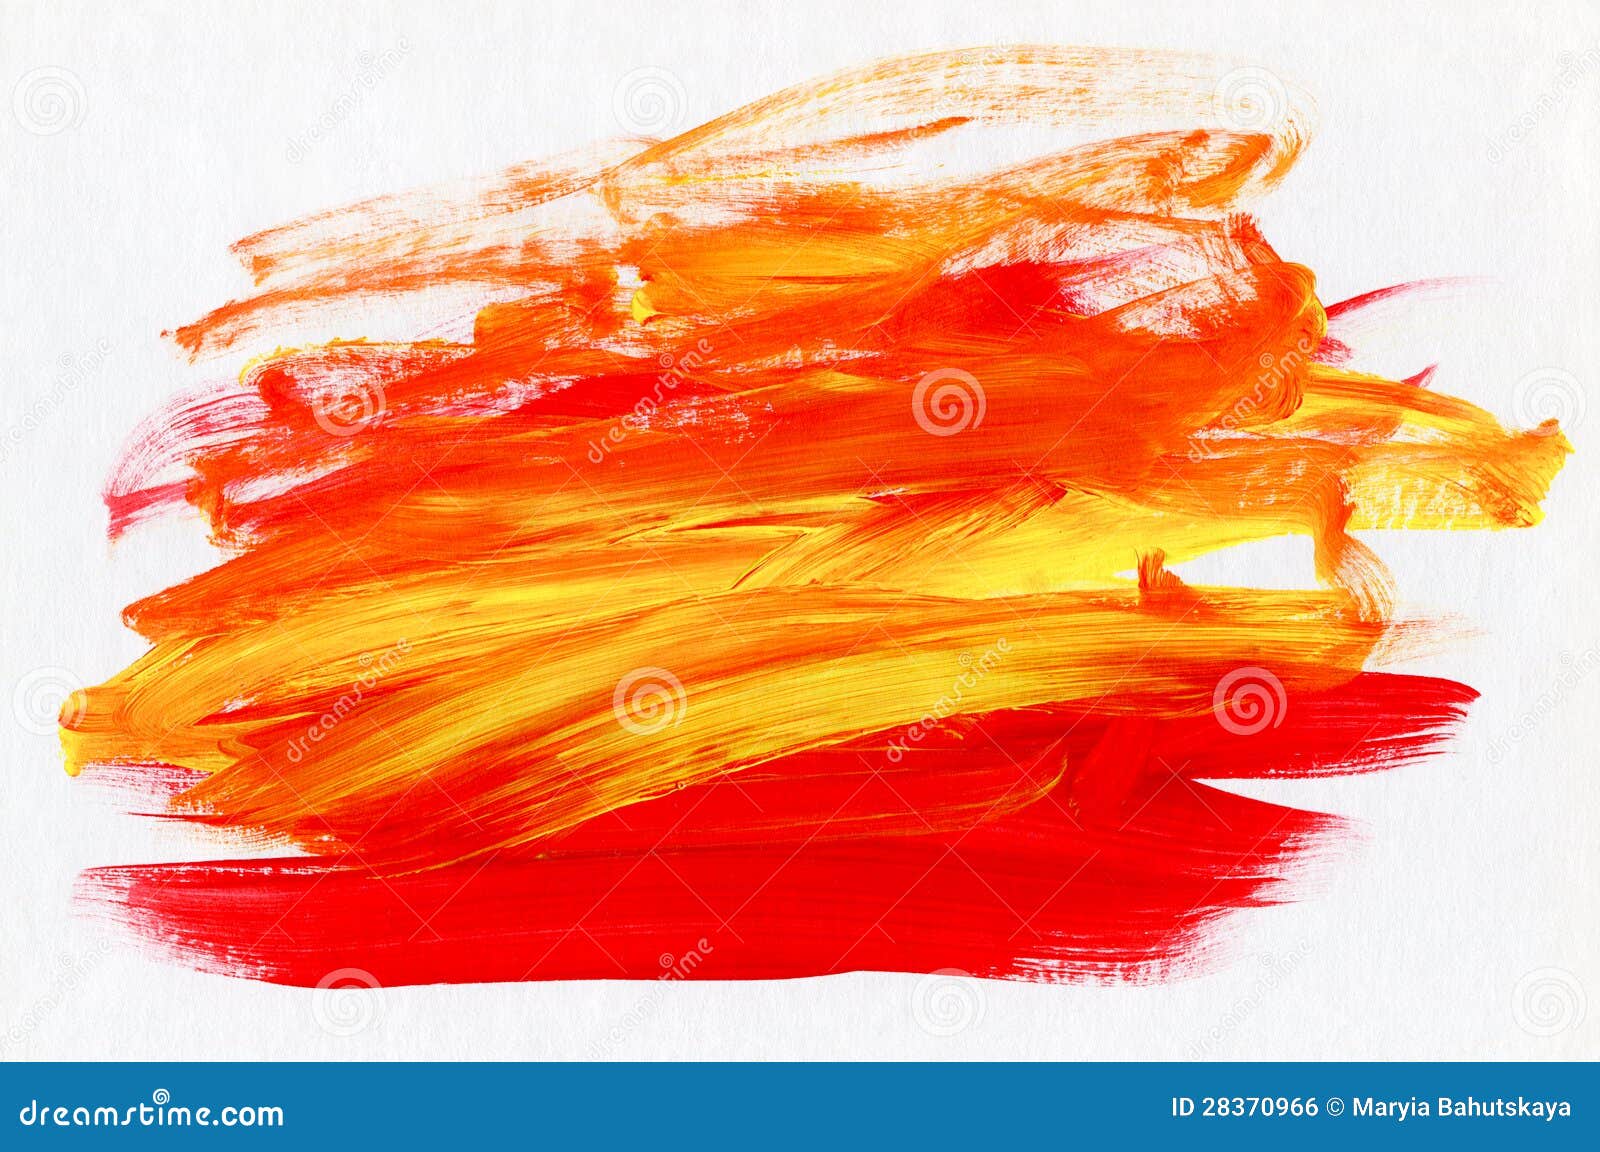 acrylic red and yellow abstract background